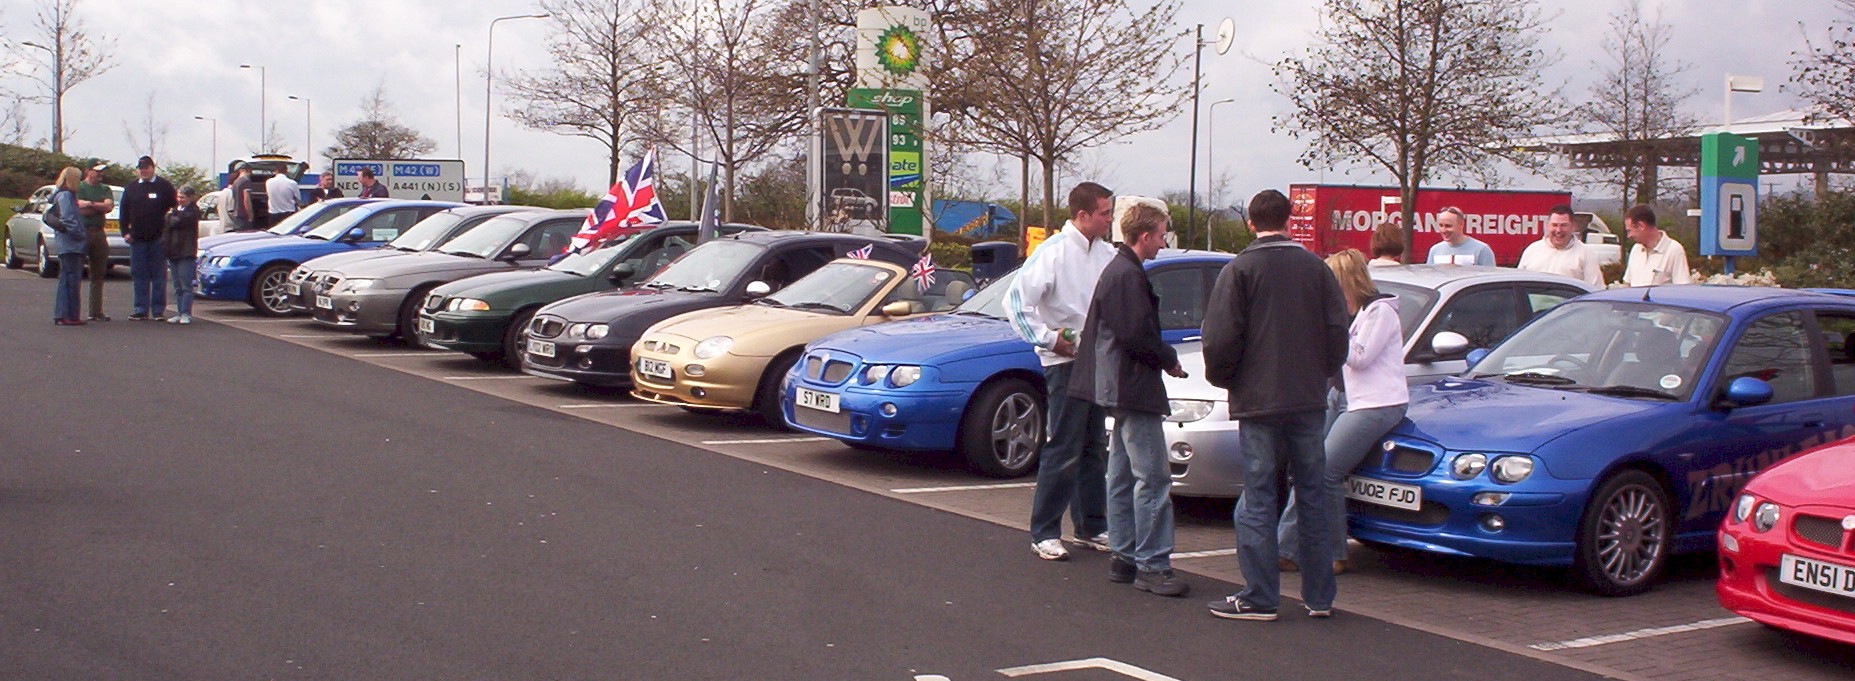 Part of the Gathering at Hopwood Services